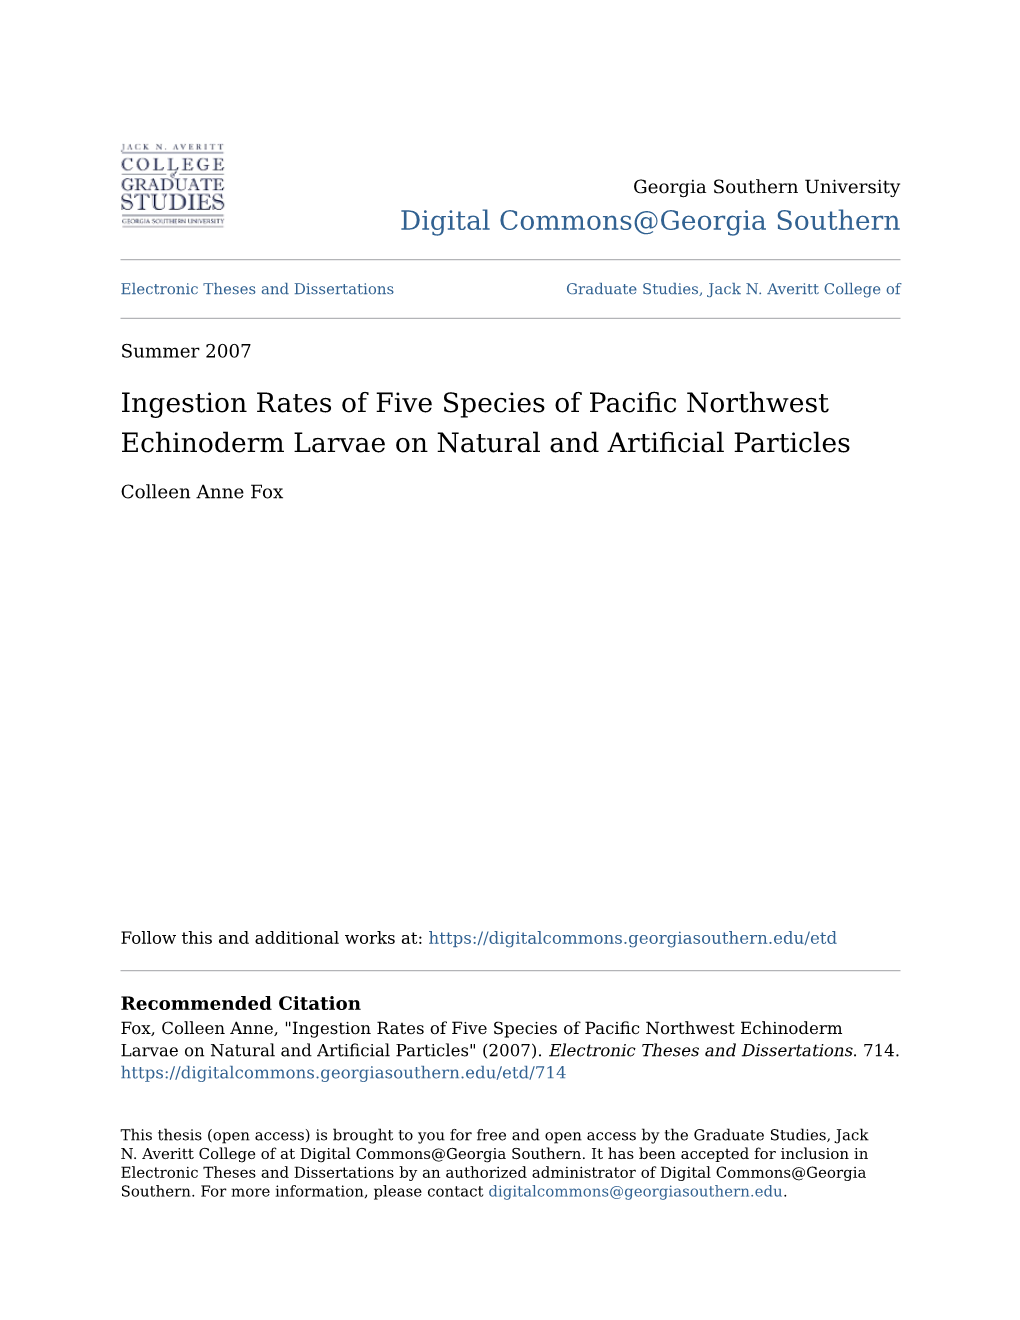 Ingestion Rates of Five Species of Pacific Northwest Echinoderm Larvae on Natural and Artificial Articlesp